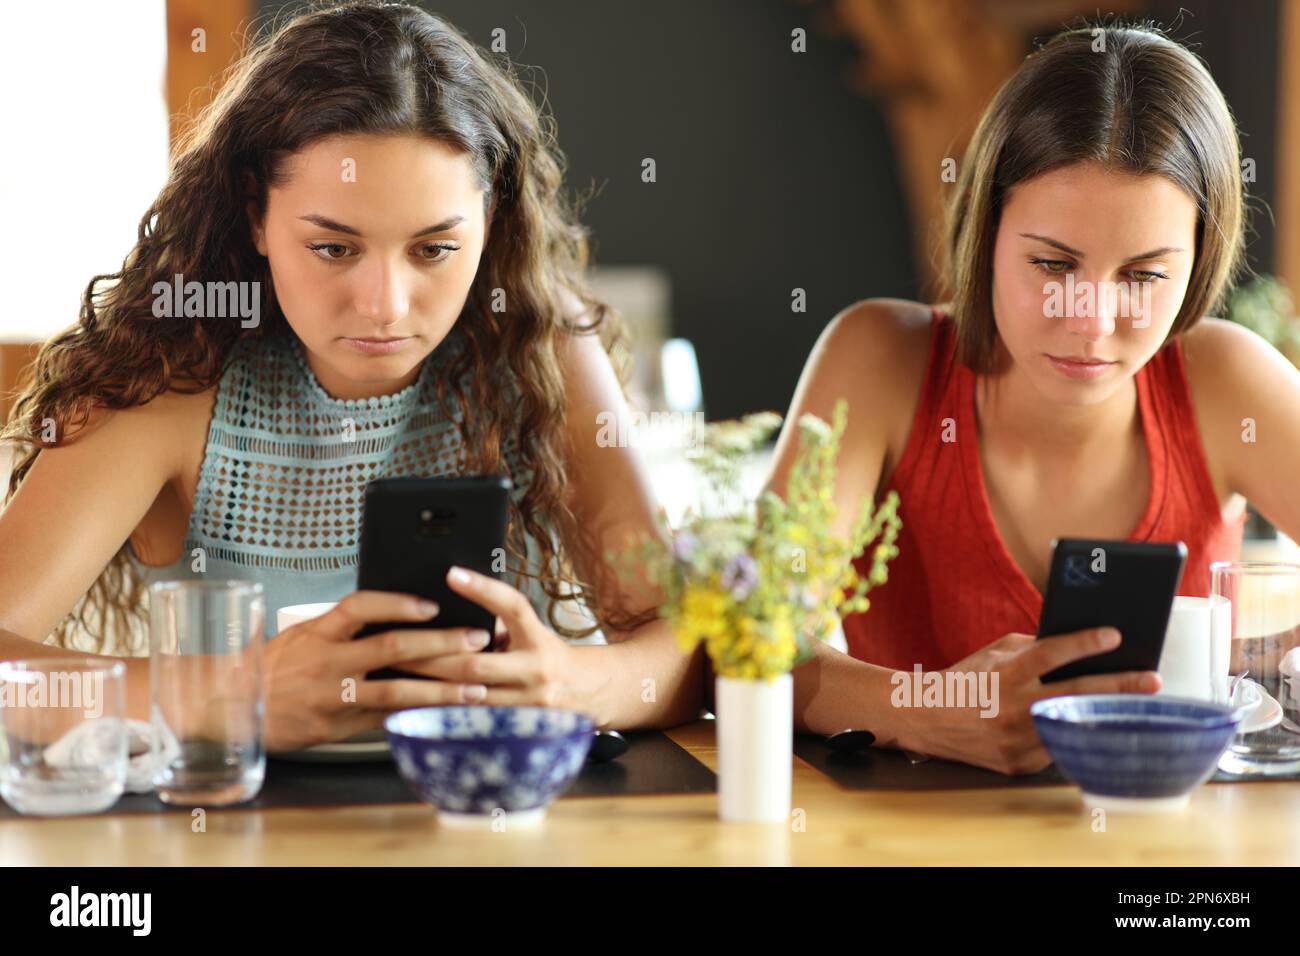 Front view of two friends in a restaurant ignoring each other using their phones Stock Photo